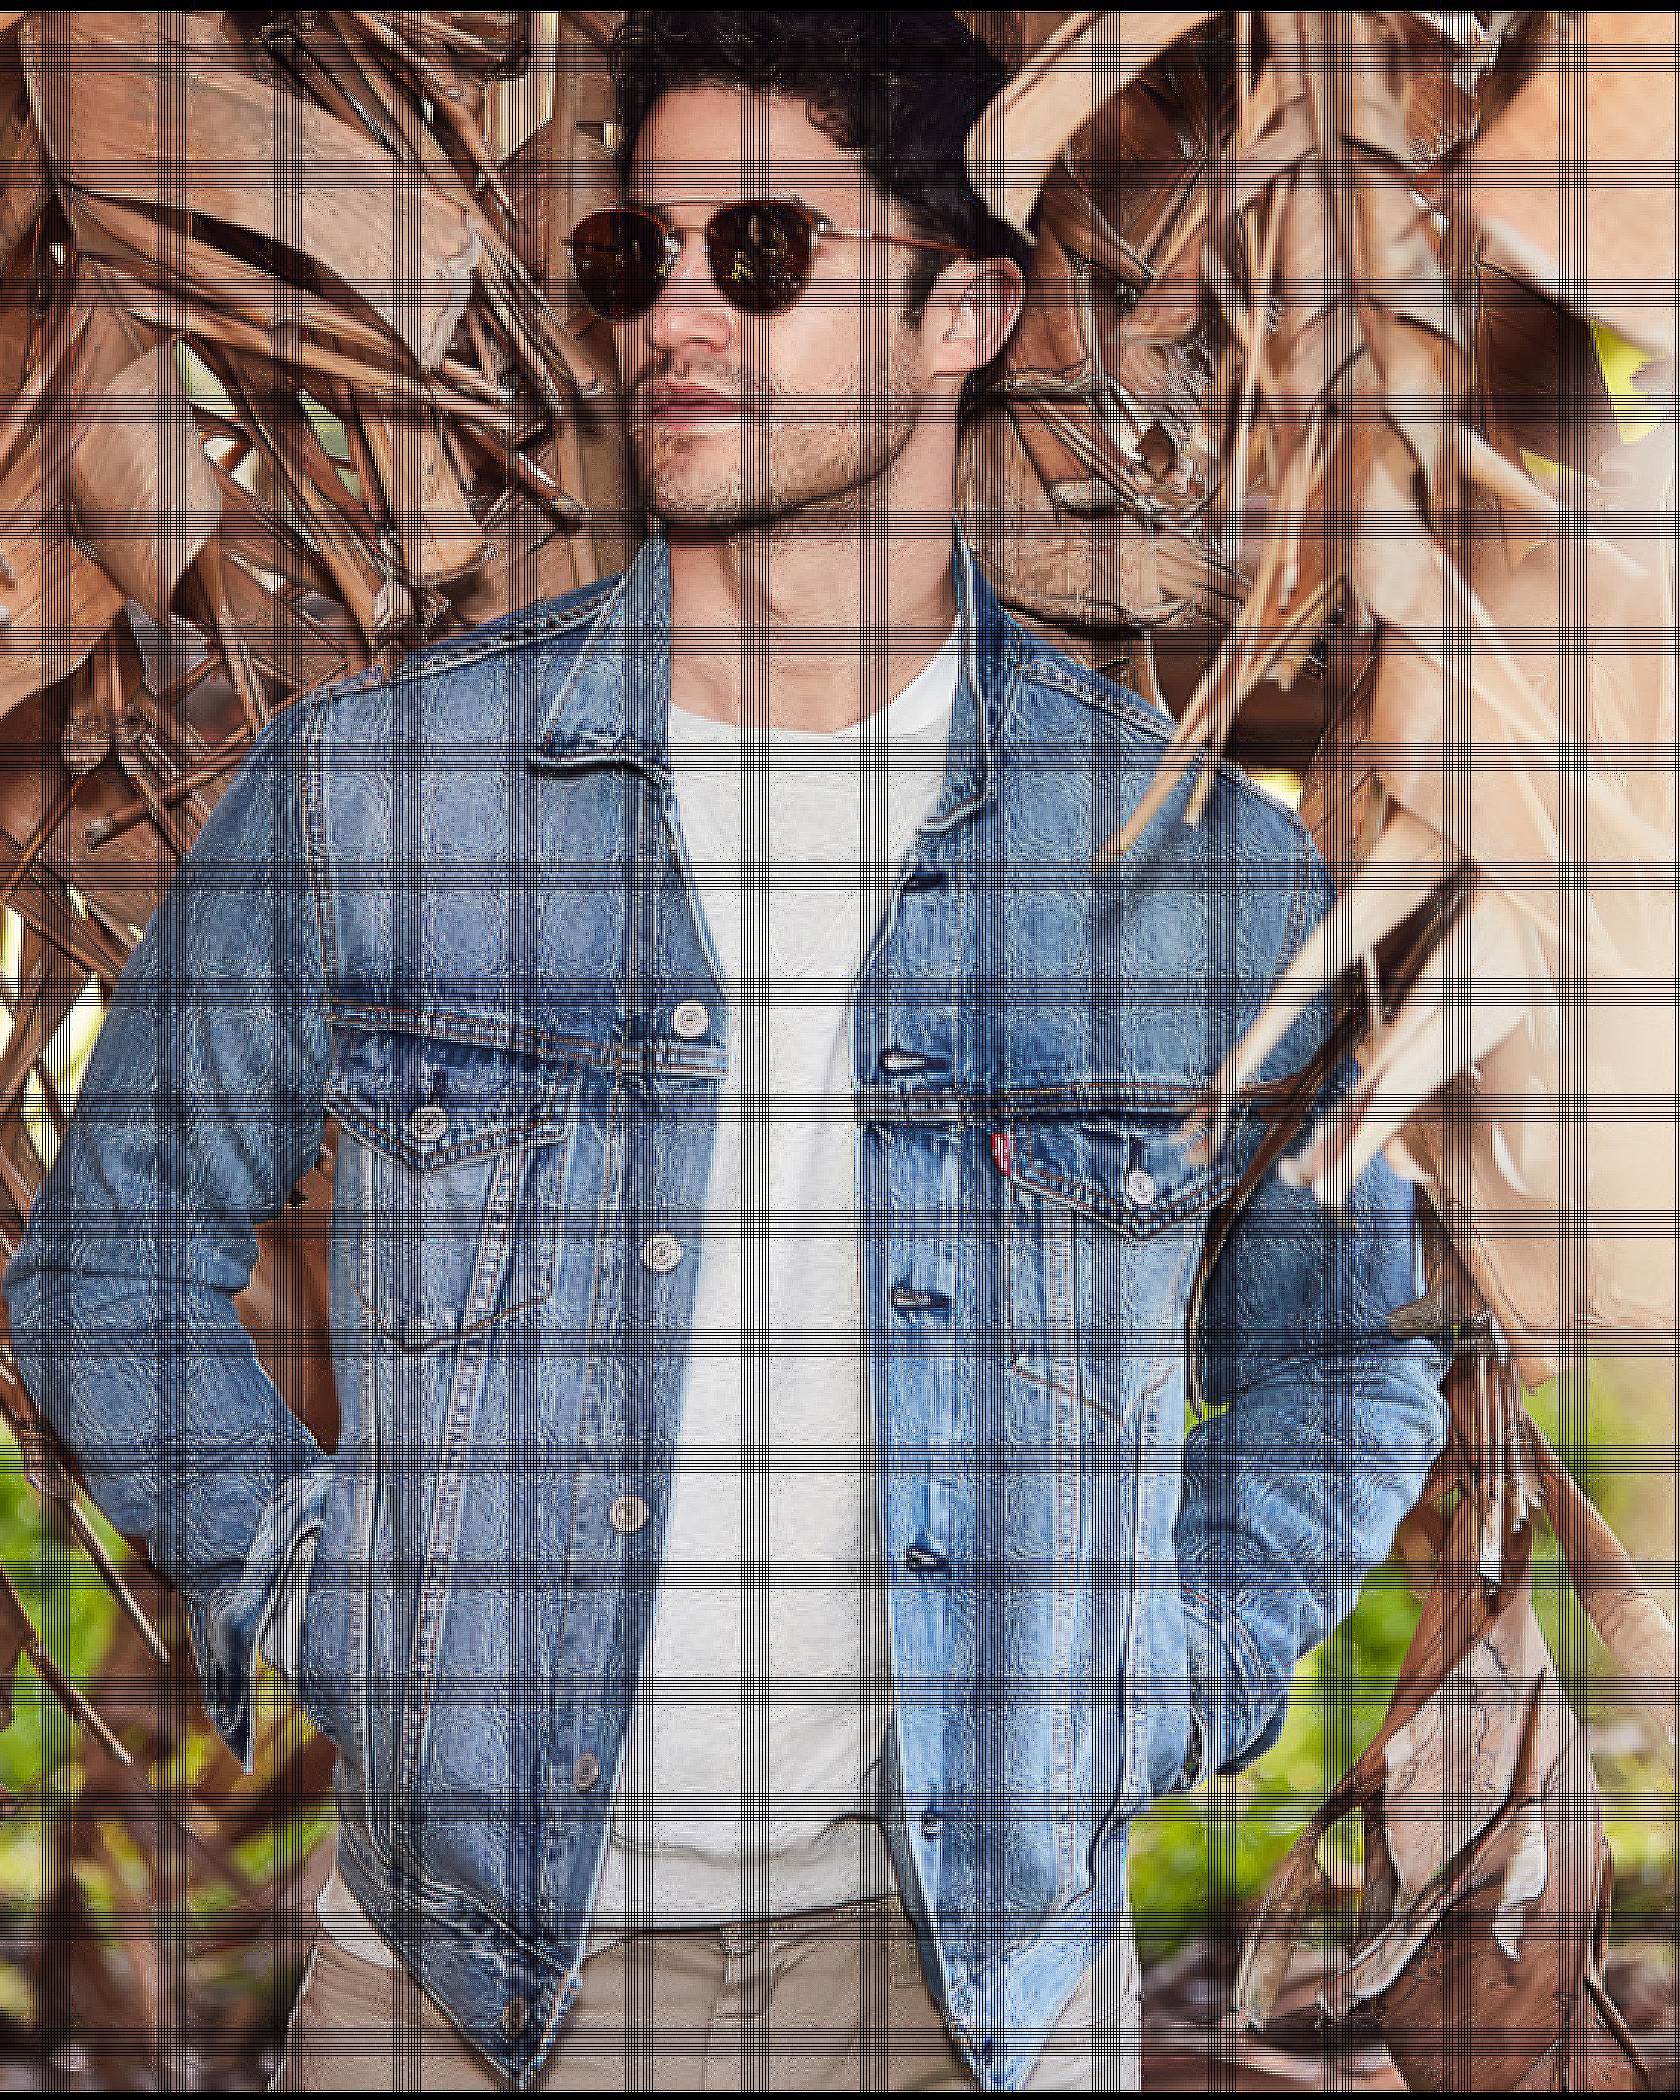 DARREN CRISS wearing a denim jacket and shades standing in front of a palm tree.